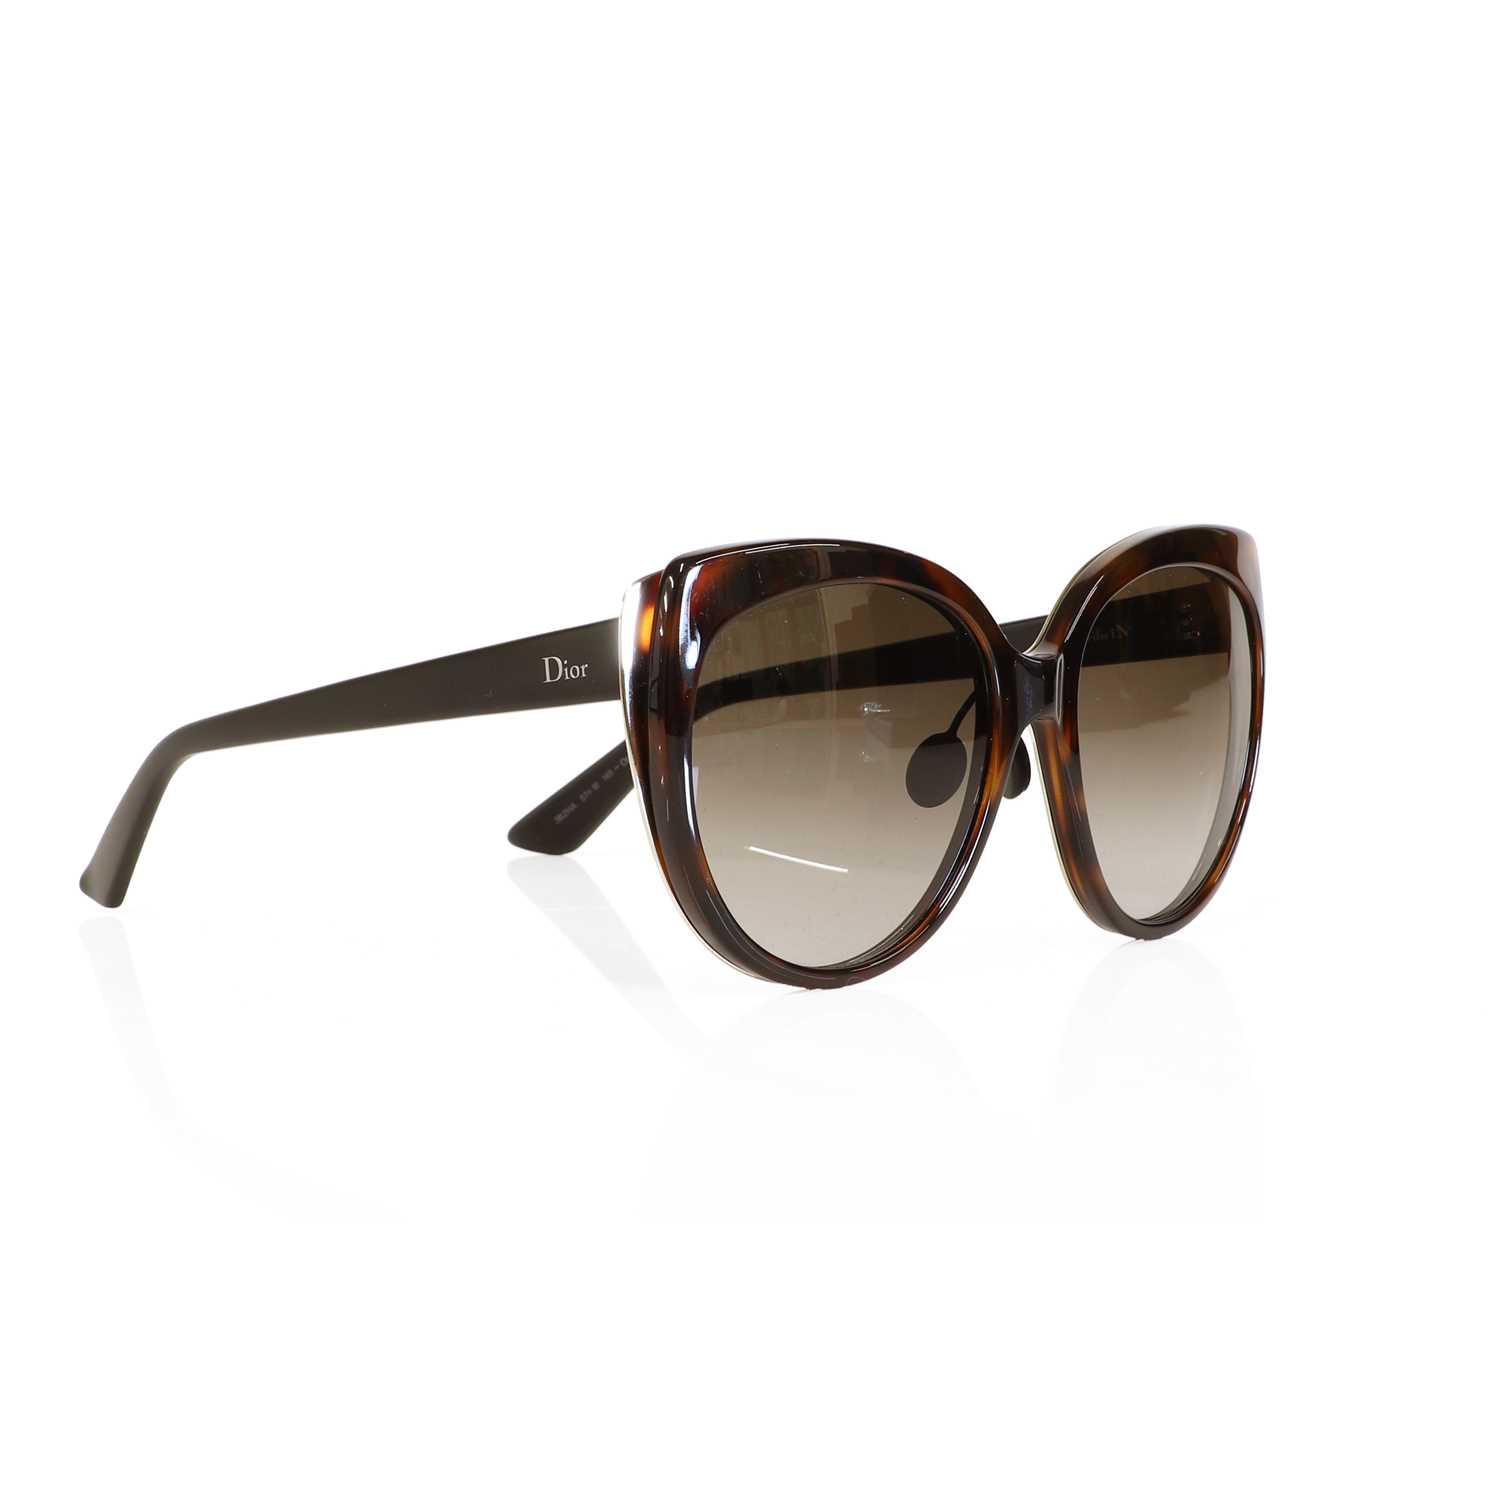 A pair of Christian Dior faux tortoiseshell and silver-rimmed sunglasses, - Image 9 of 9